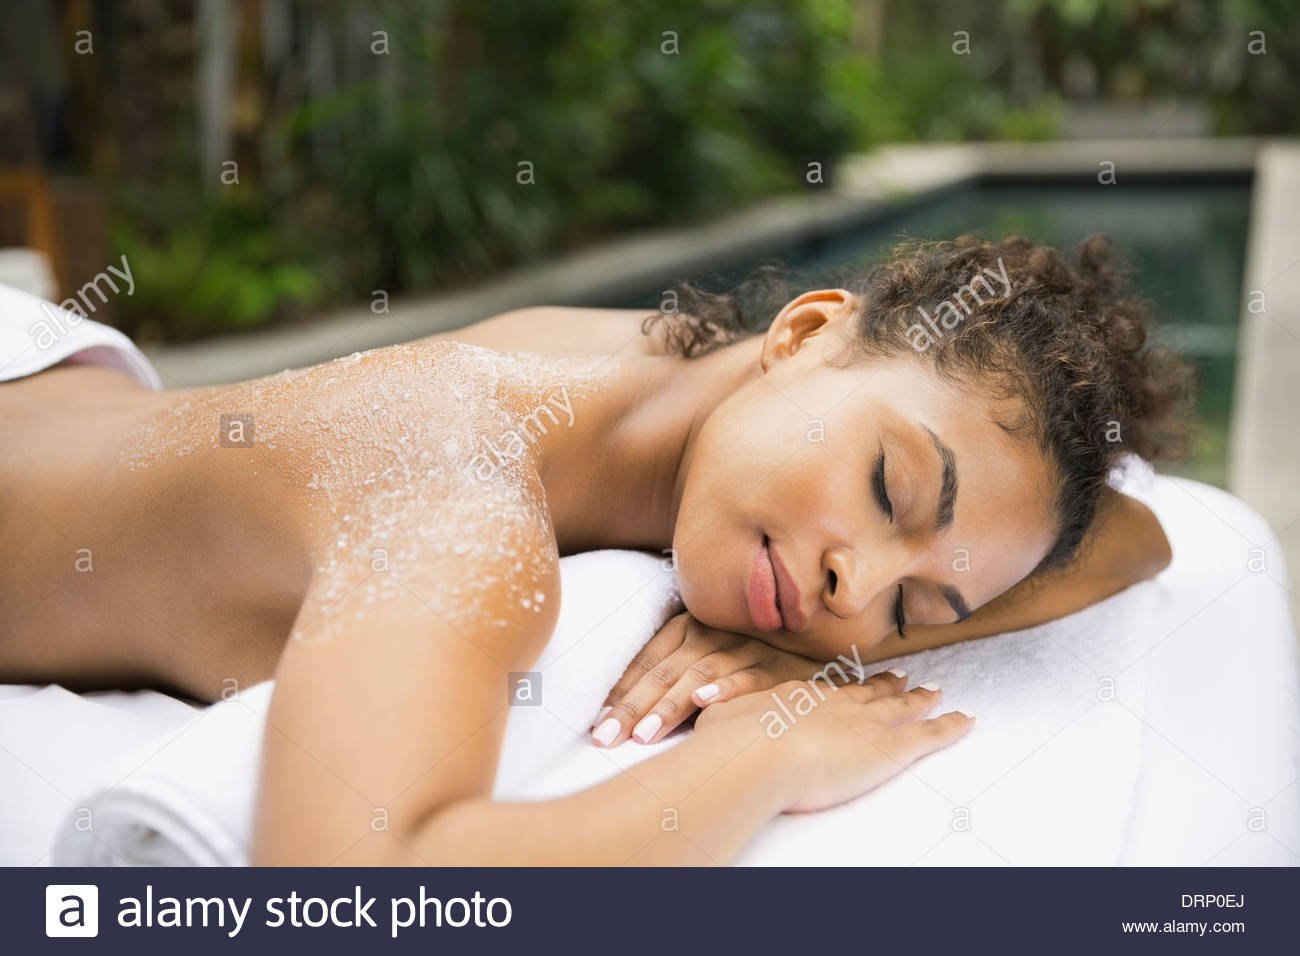 Relaxed woman at day spa receiving body scrub Stock Photo